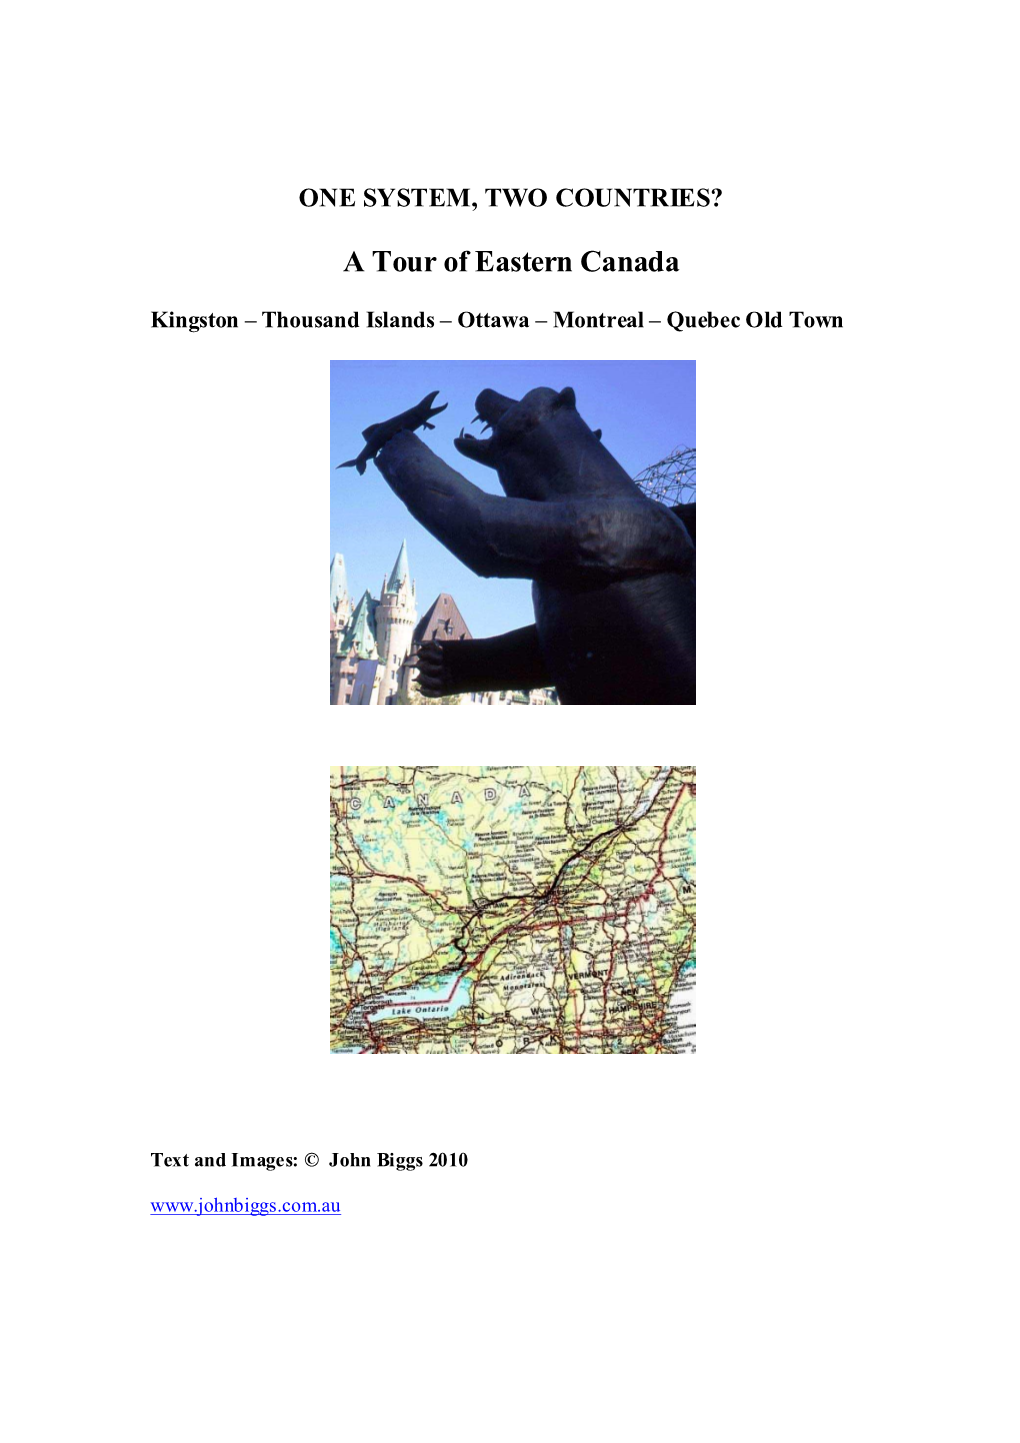 A Tour of Eastern Canada